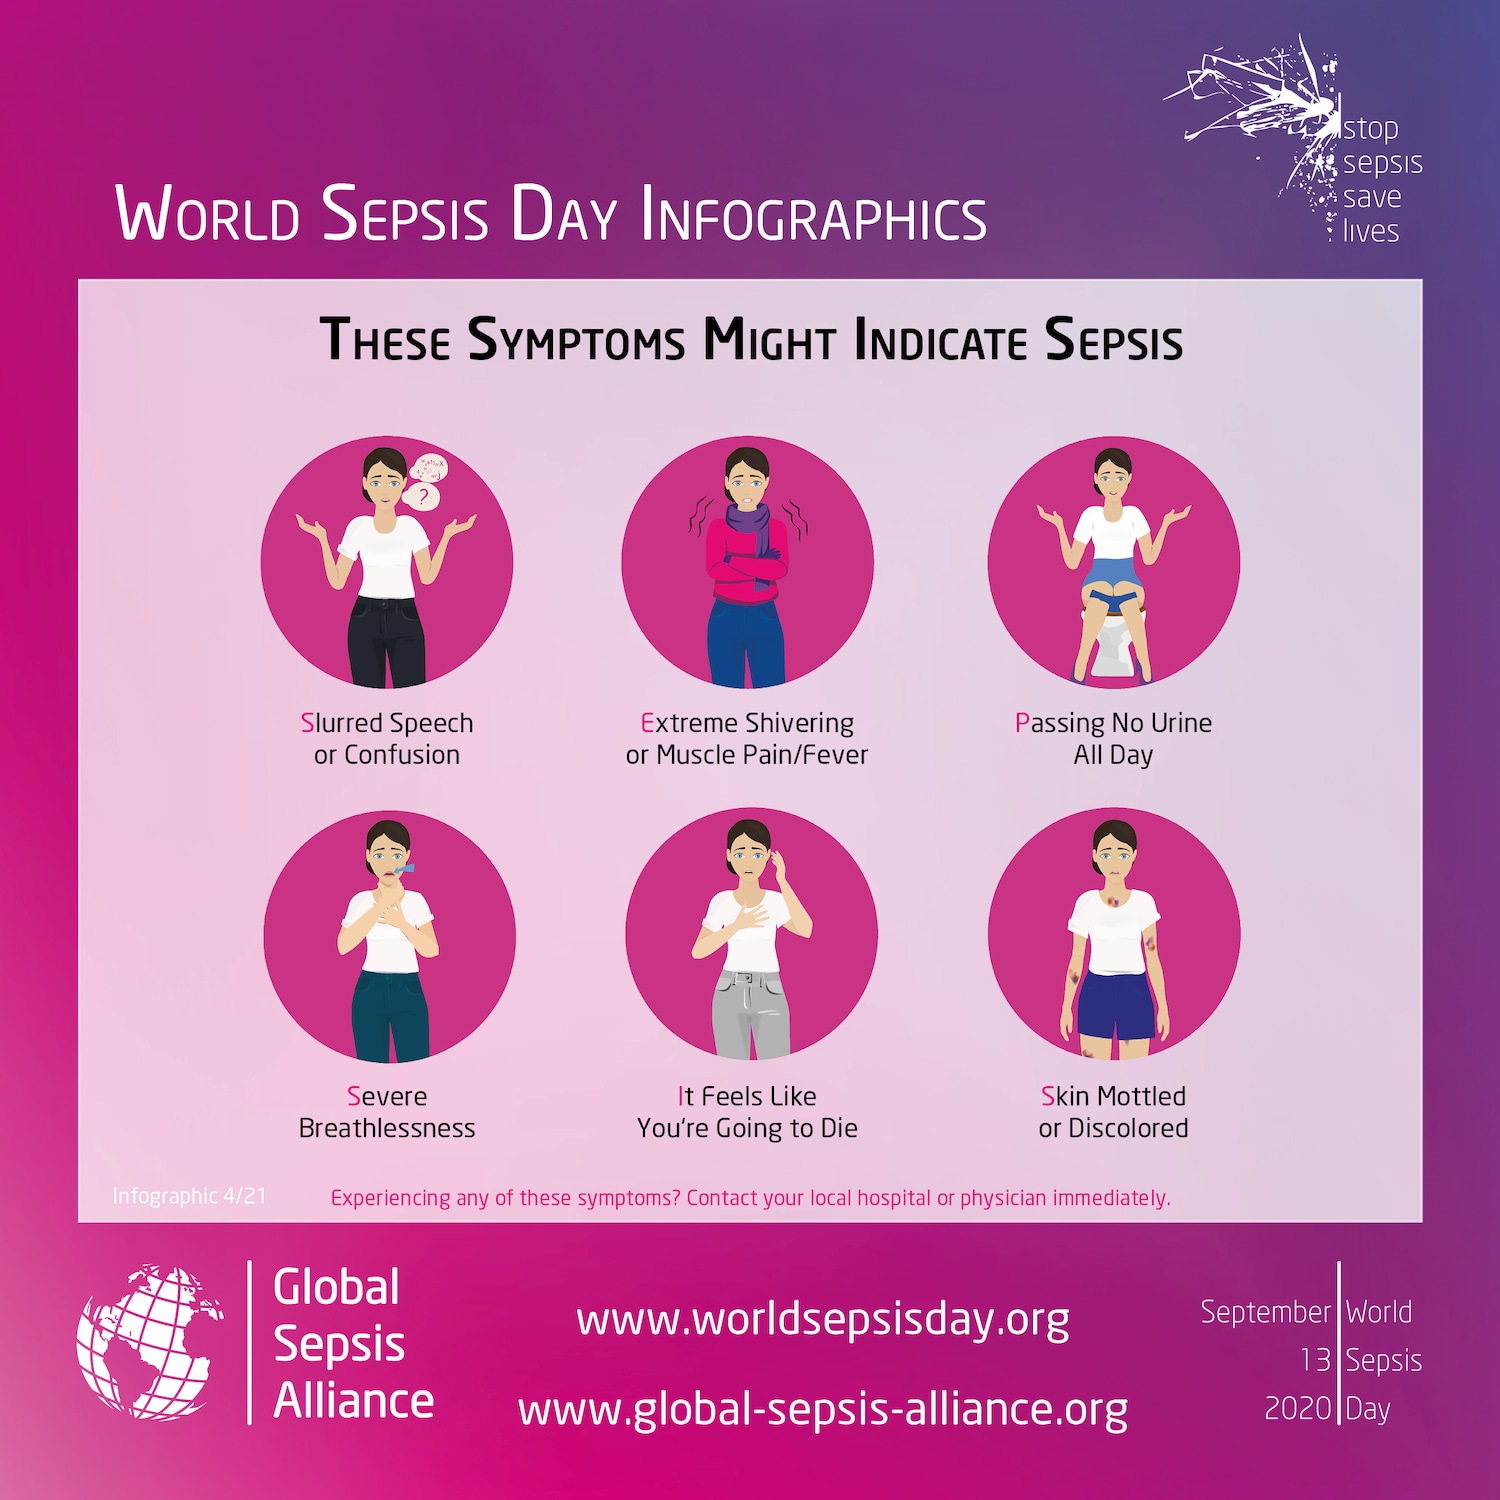 World Sepsis Day Infographic | These symptoms might indicate sepsis: Slurred speech or confusion; Extreme shivering or muscle pain/fever; Passing no urine all day; Severe breathlessness; It feels like you're going to die; Skin mottled or discoloured